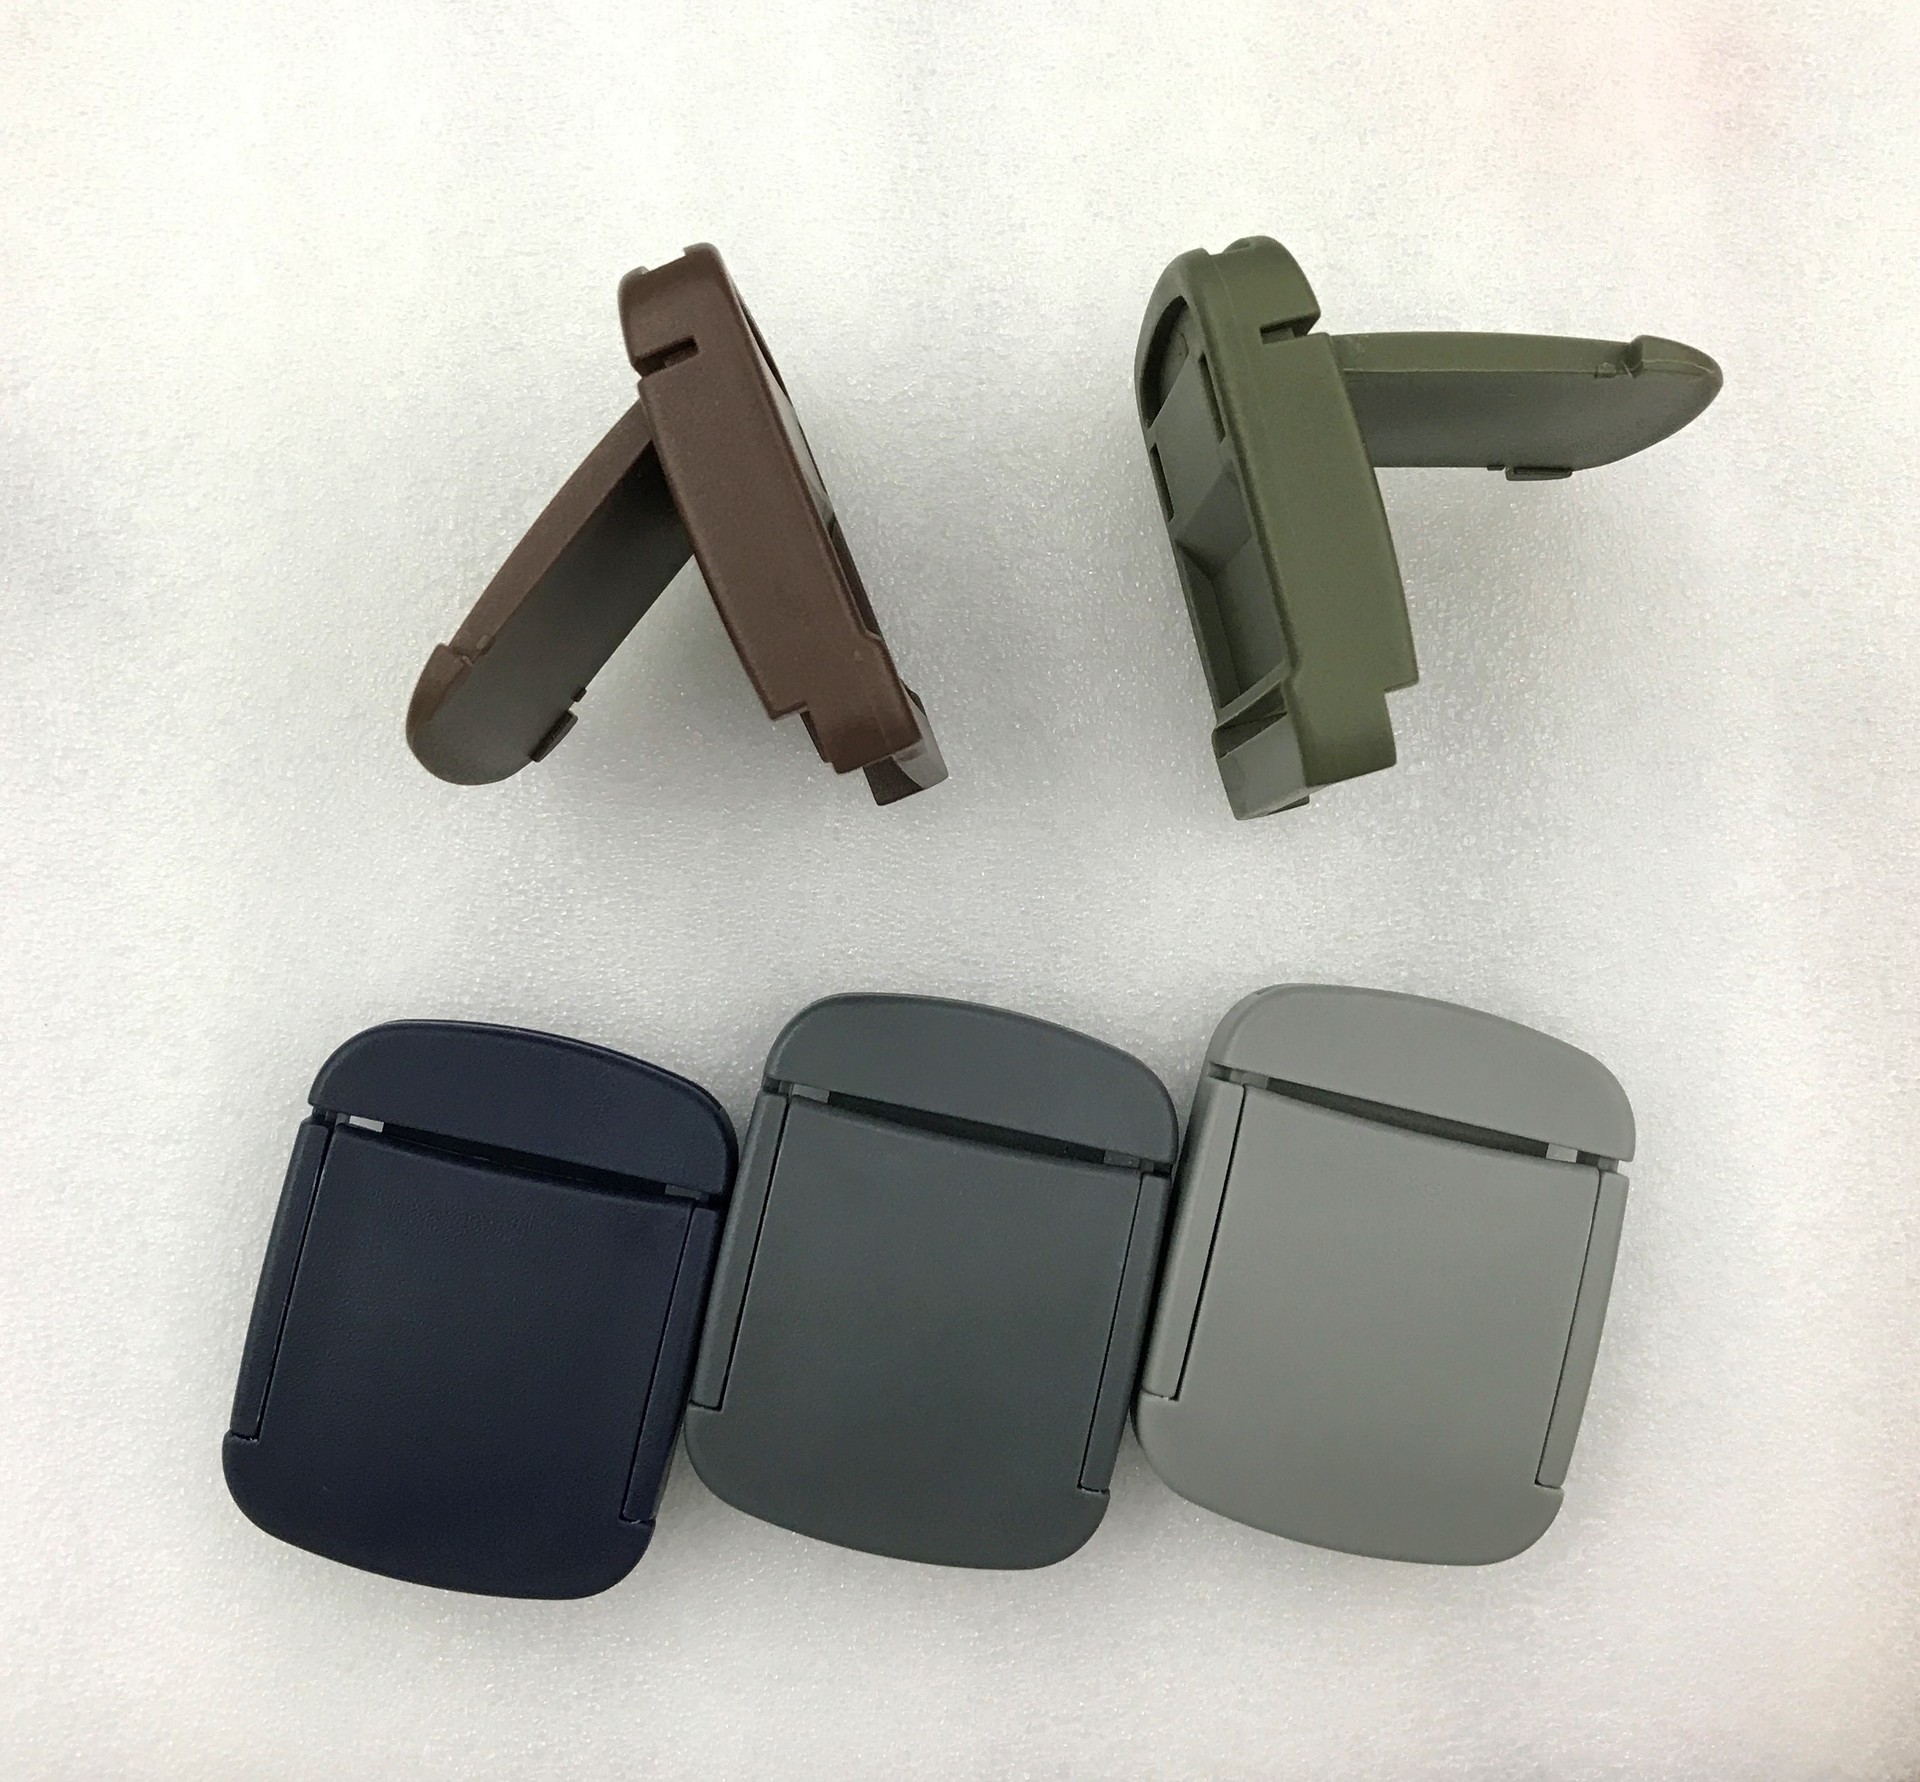 3pcs POM Plastic Belt Buckle Plastic Belt Head Plastic Buckle Head Suitable for All Kinds of Cloth with A Width of 3.8cm Body